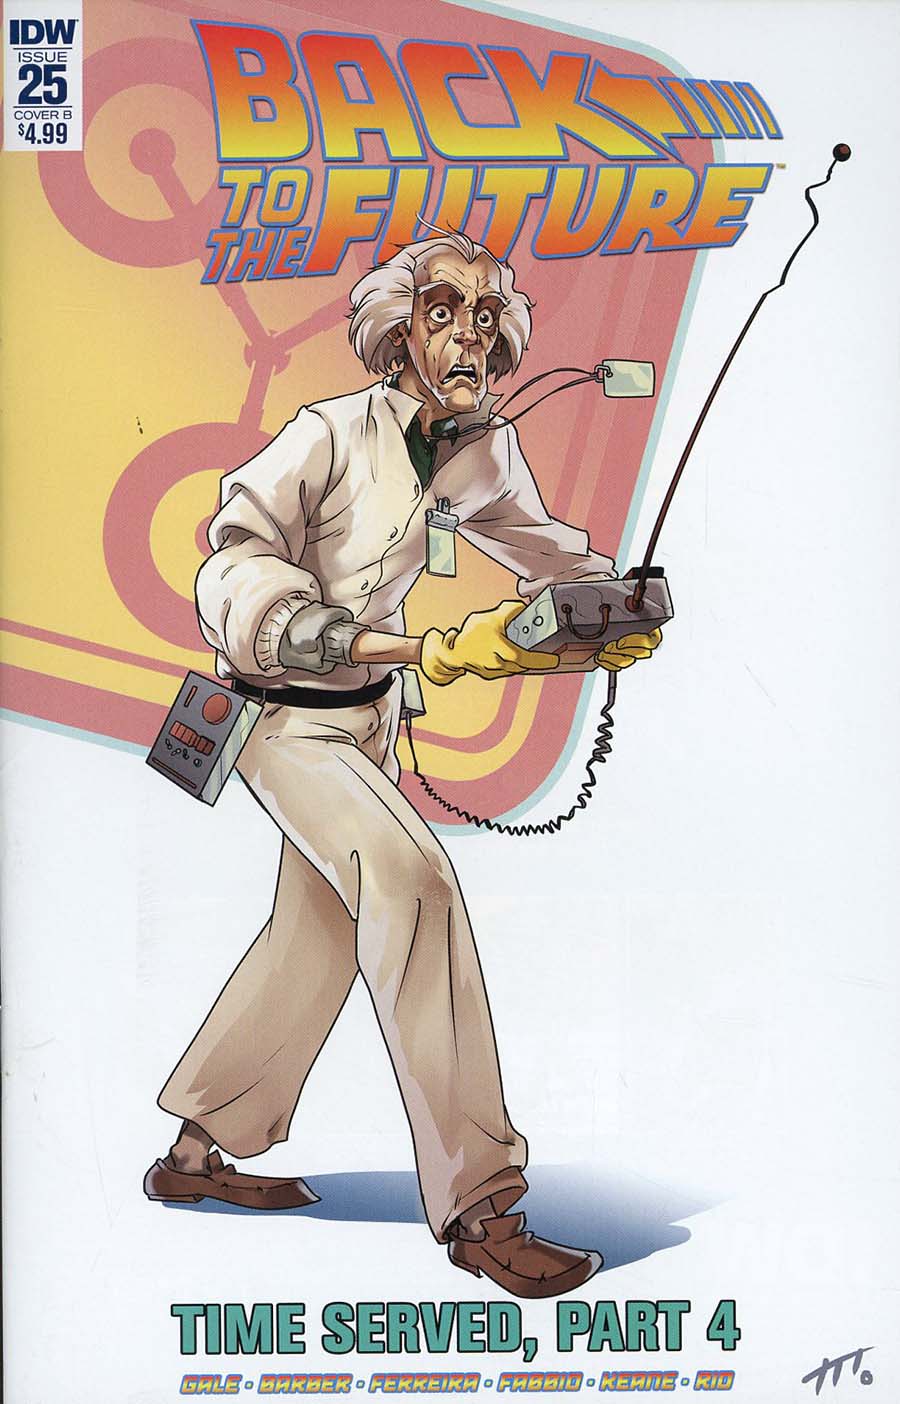 Back To The Future Vol 2 #25 Cover B Variant Xavi Montell Cover